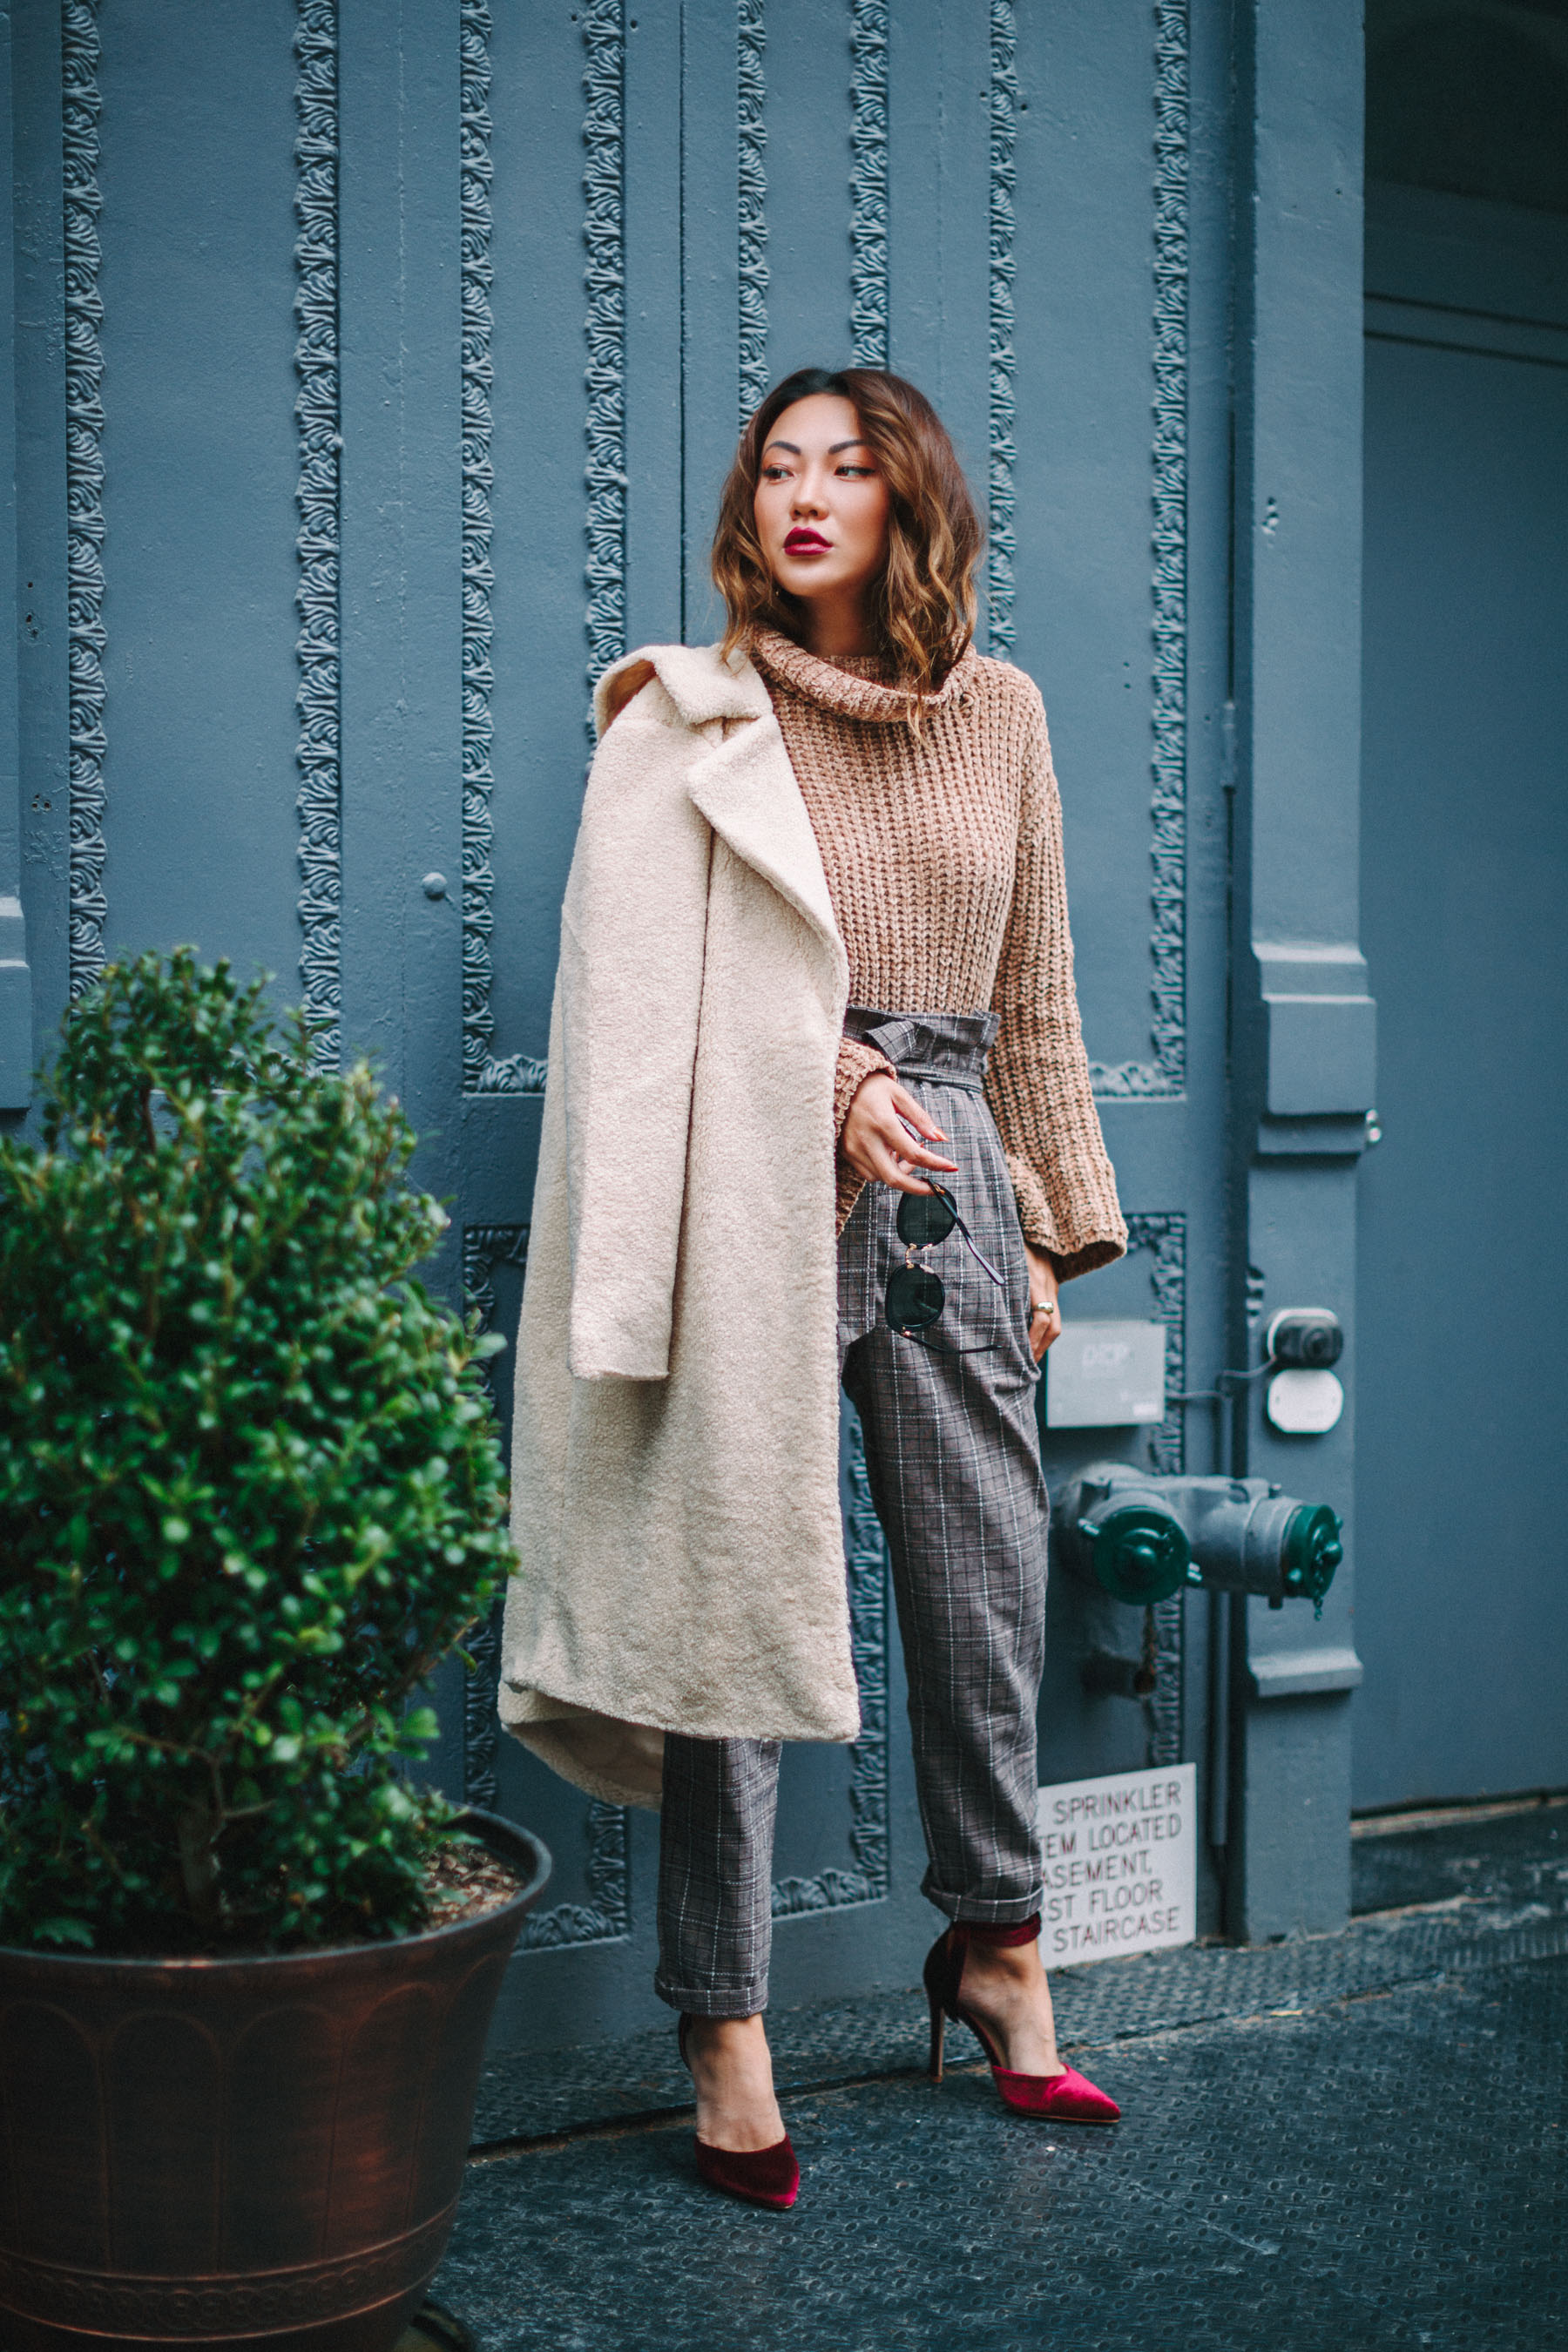 TEXTURED COATS TO TRY THIS WINTER // Notjessfashion.com